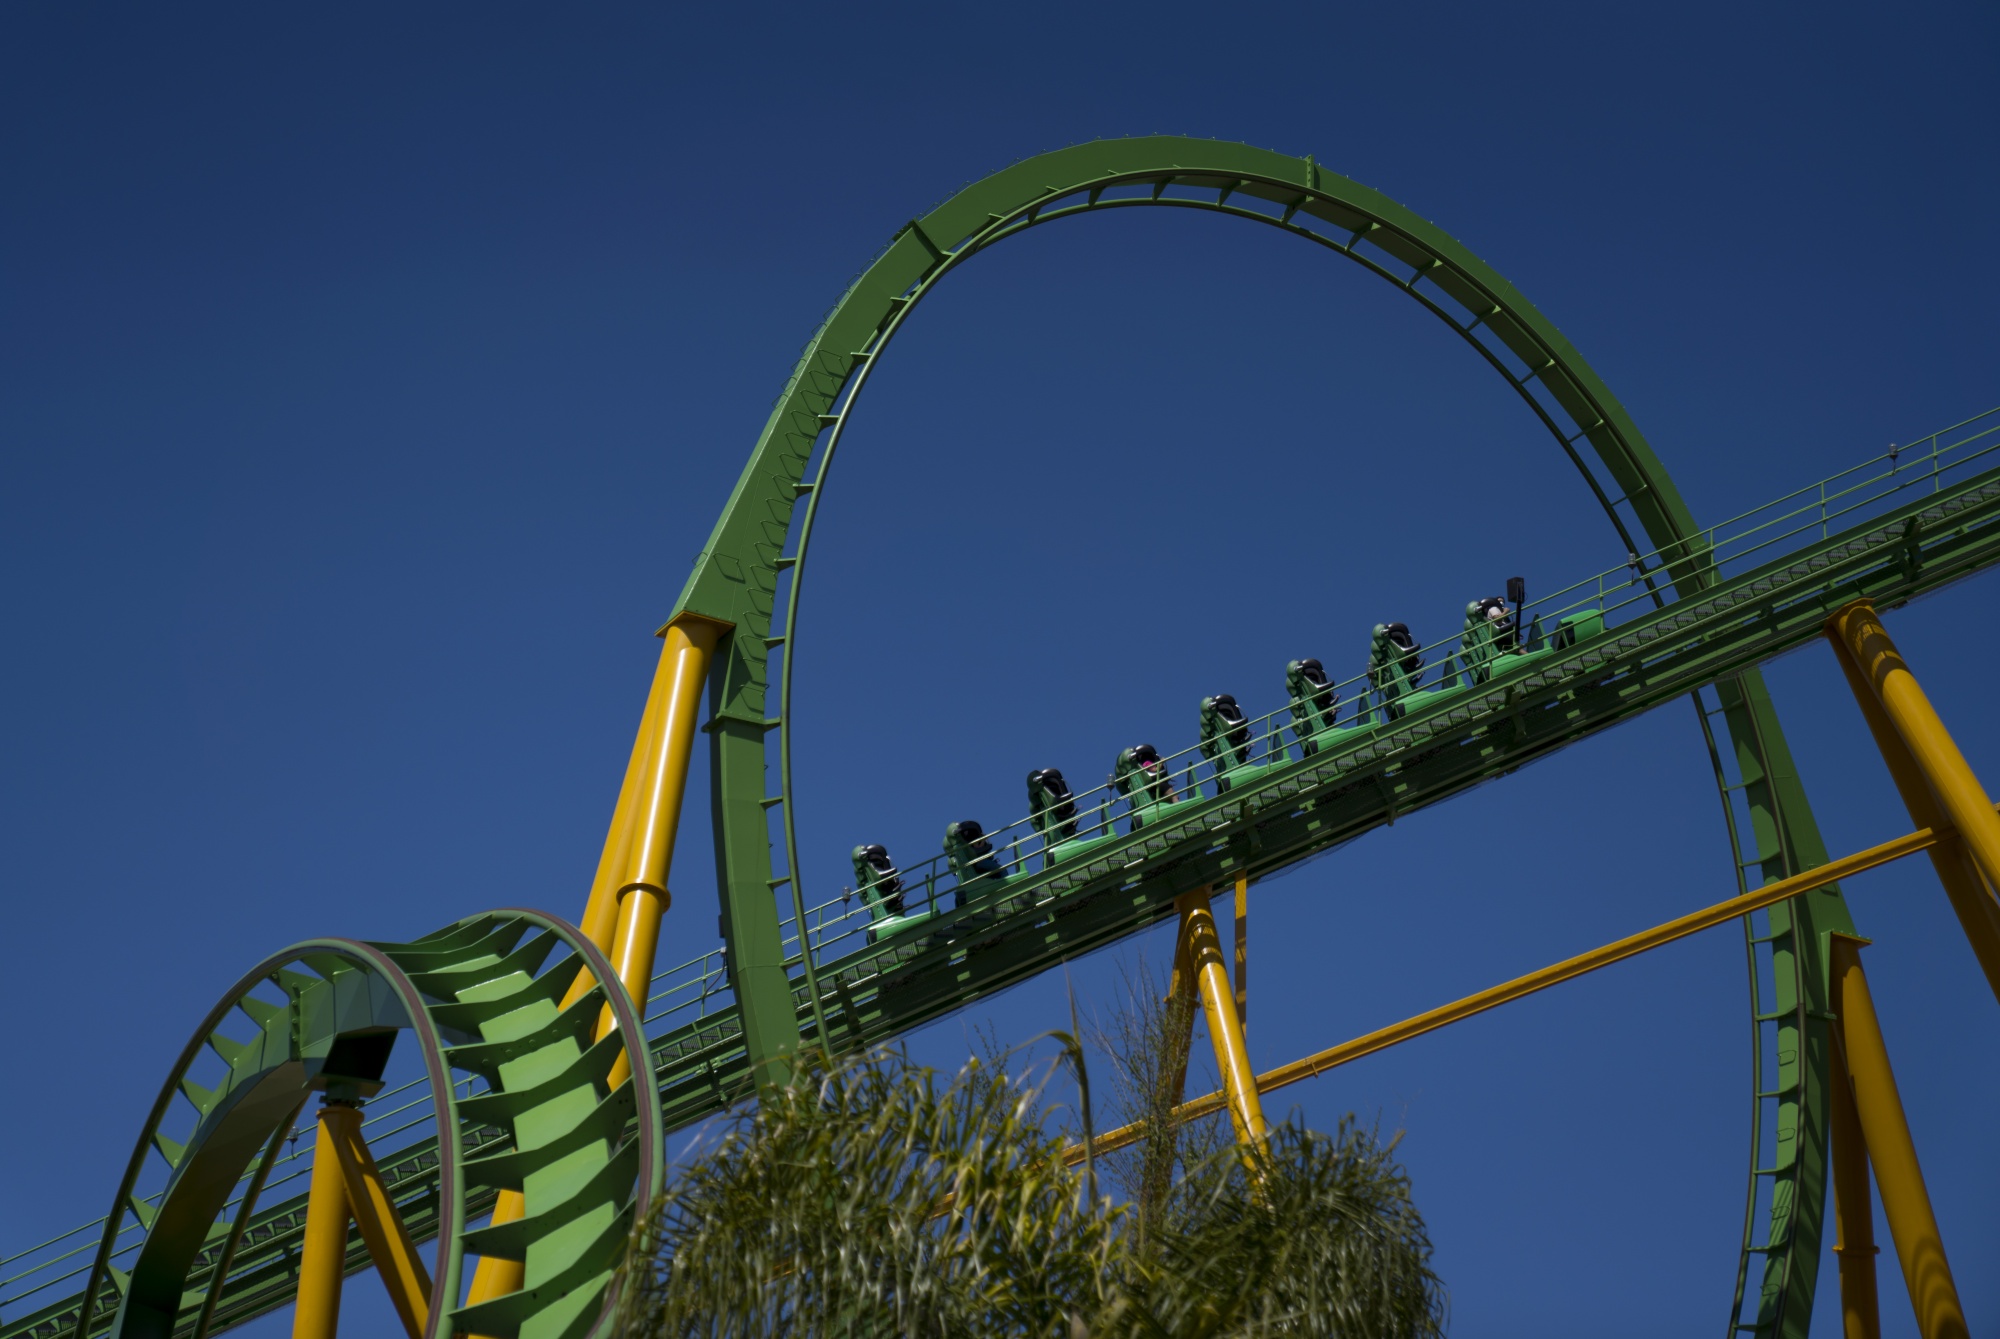 Get a cash & customer fast pass on an economic rollercoaster